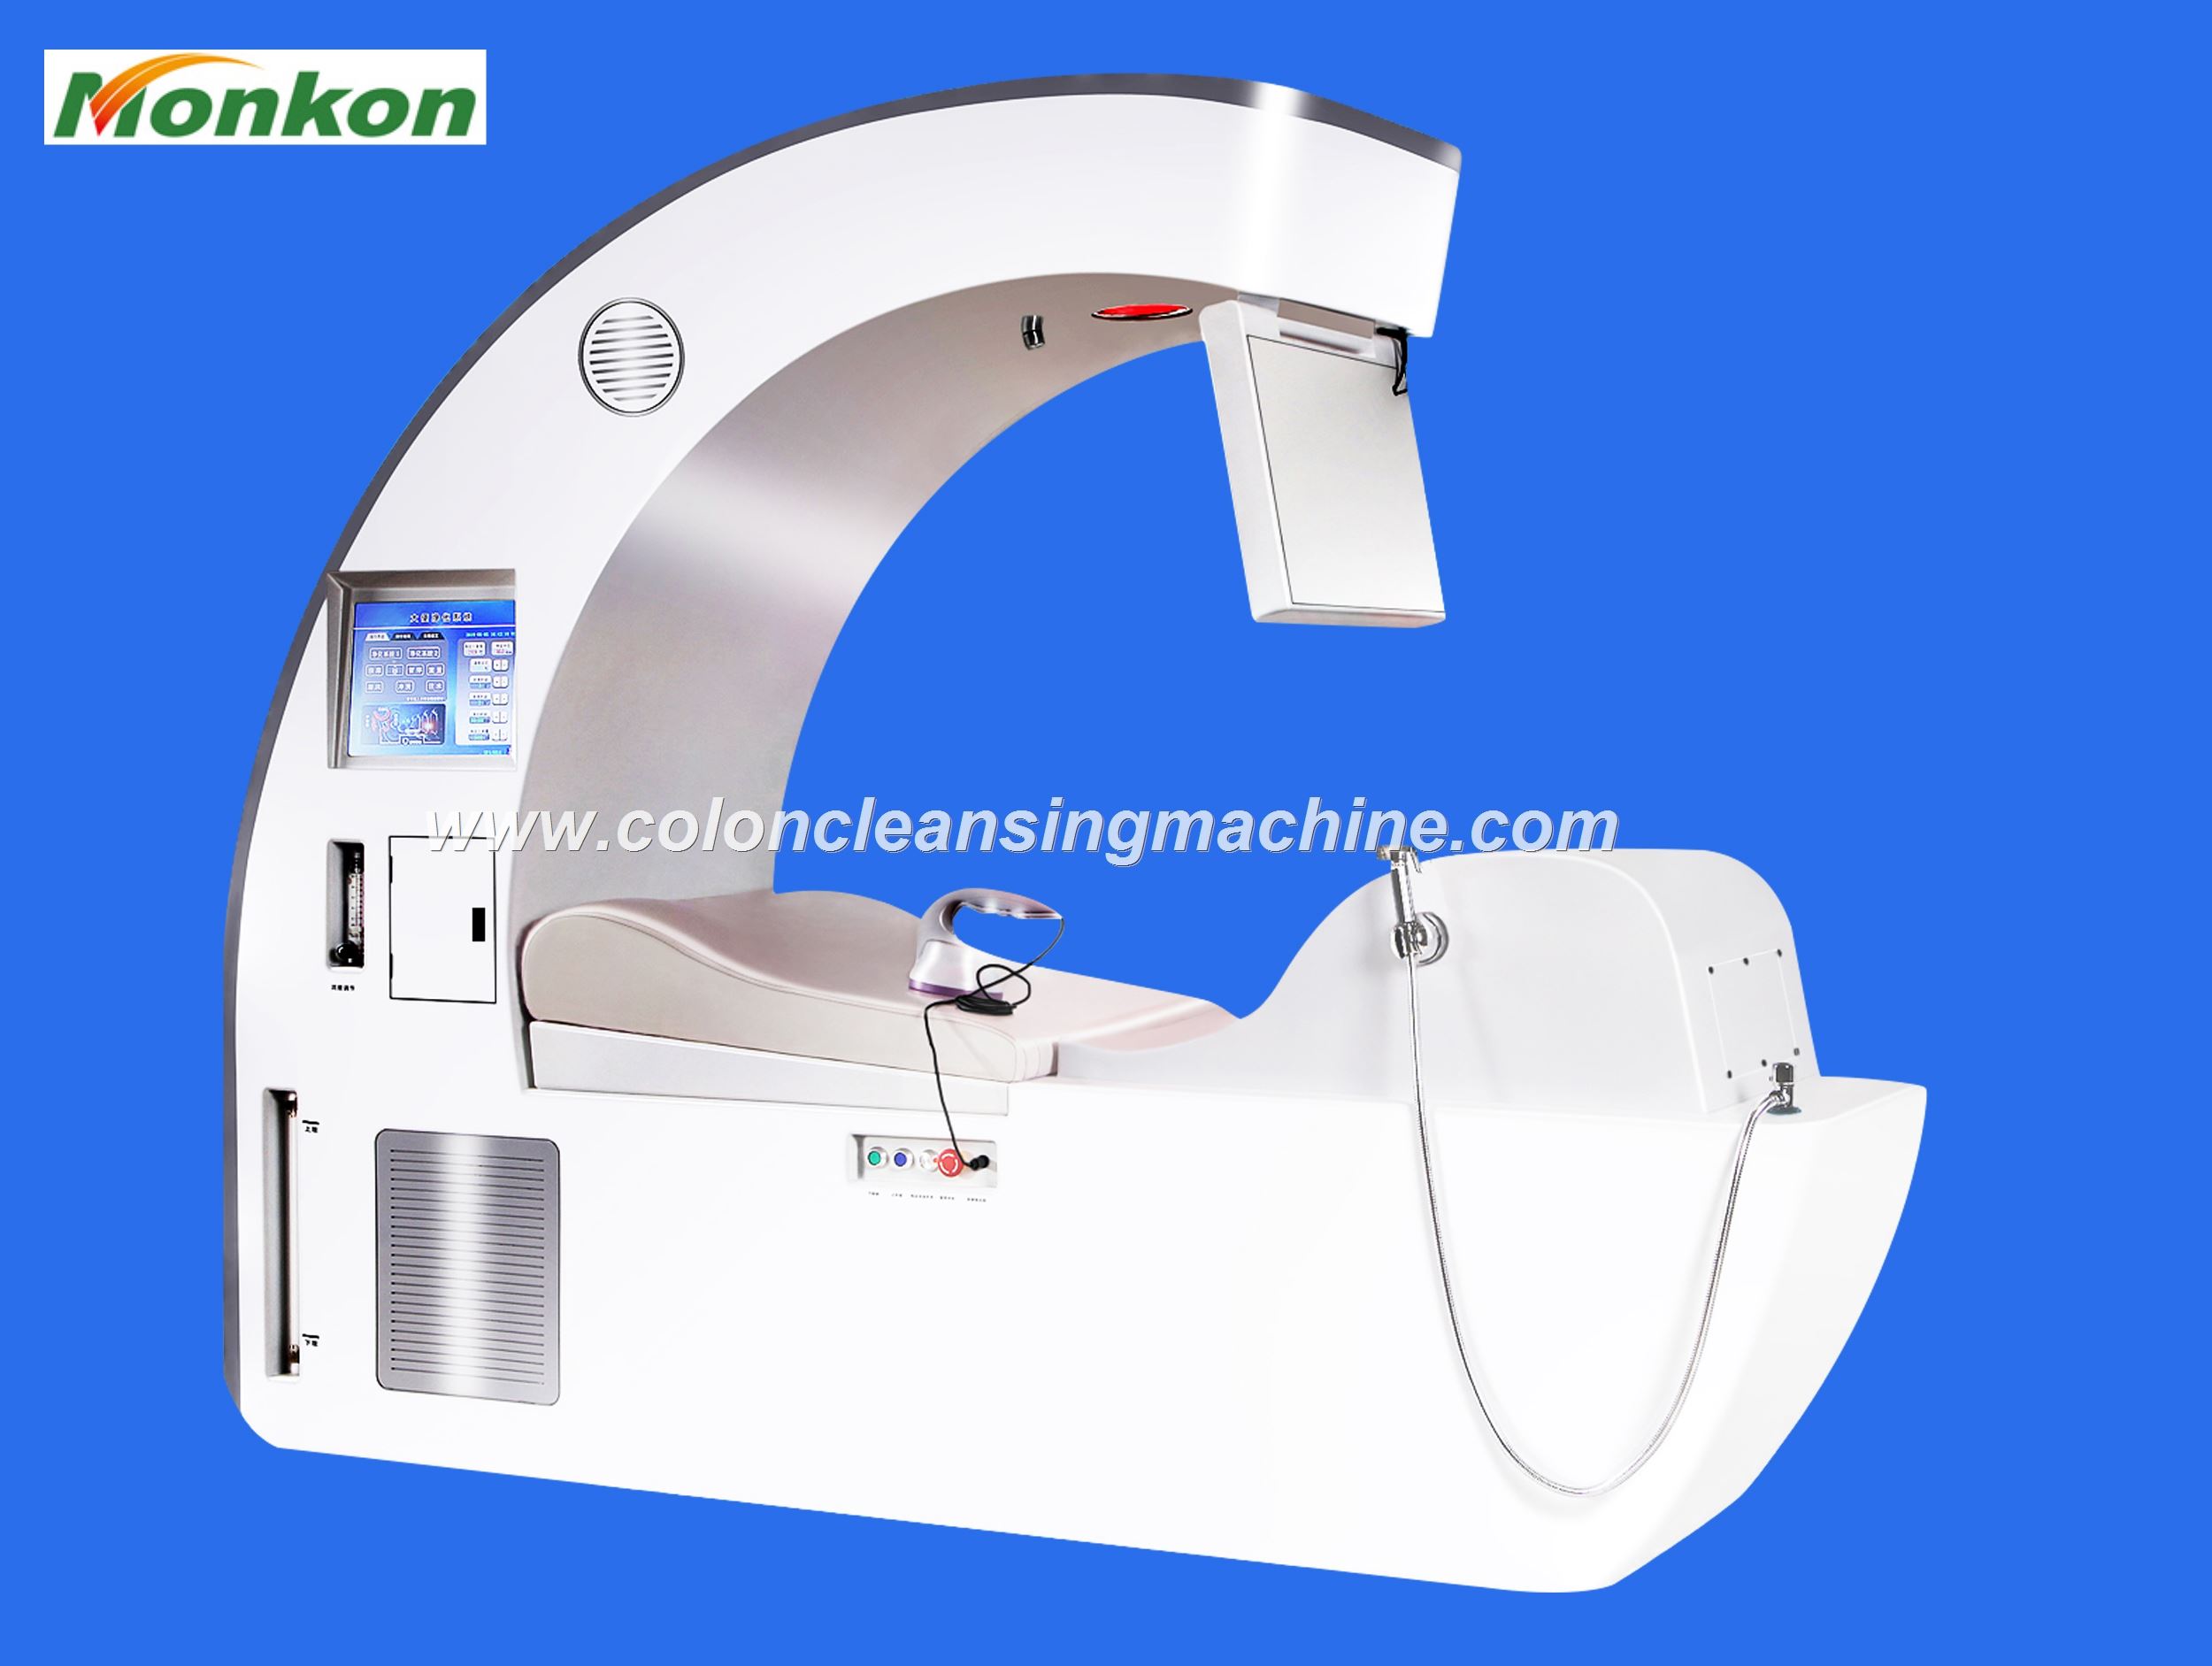 Colon Cleansing Machine at Home